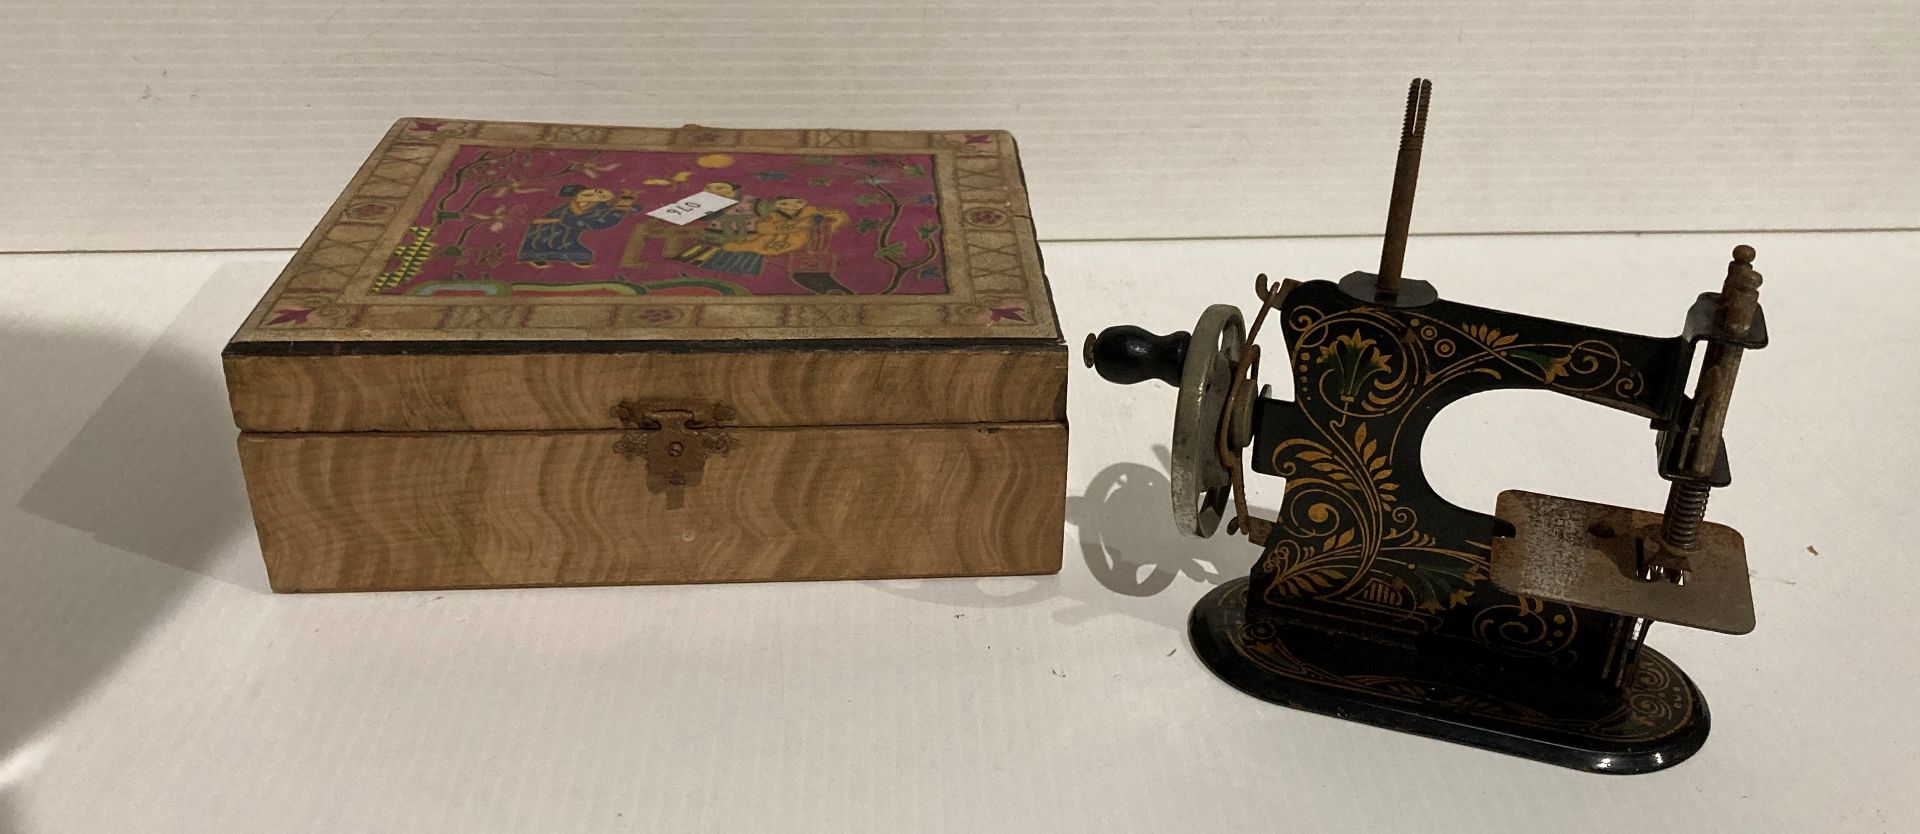 German Muller TSM/Miniature toy sewing machine in black and gold in a wooden box (saleroom